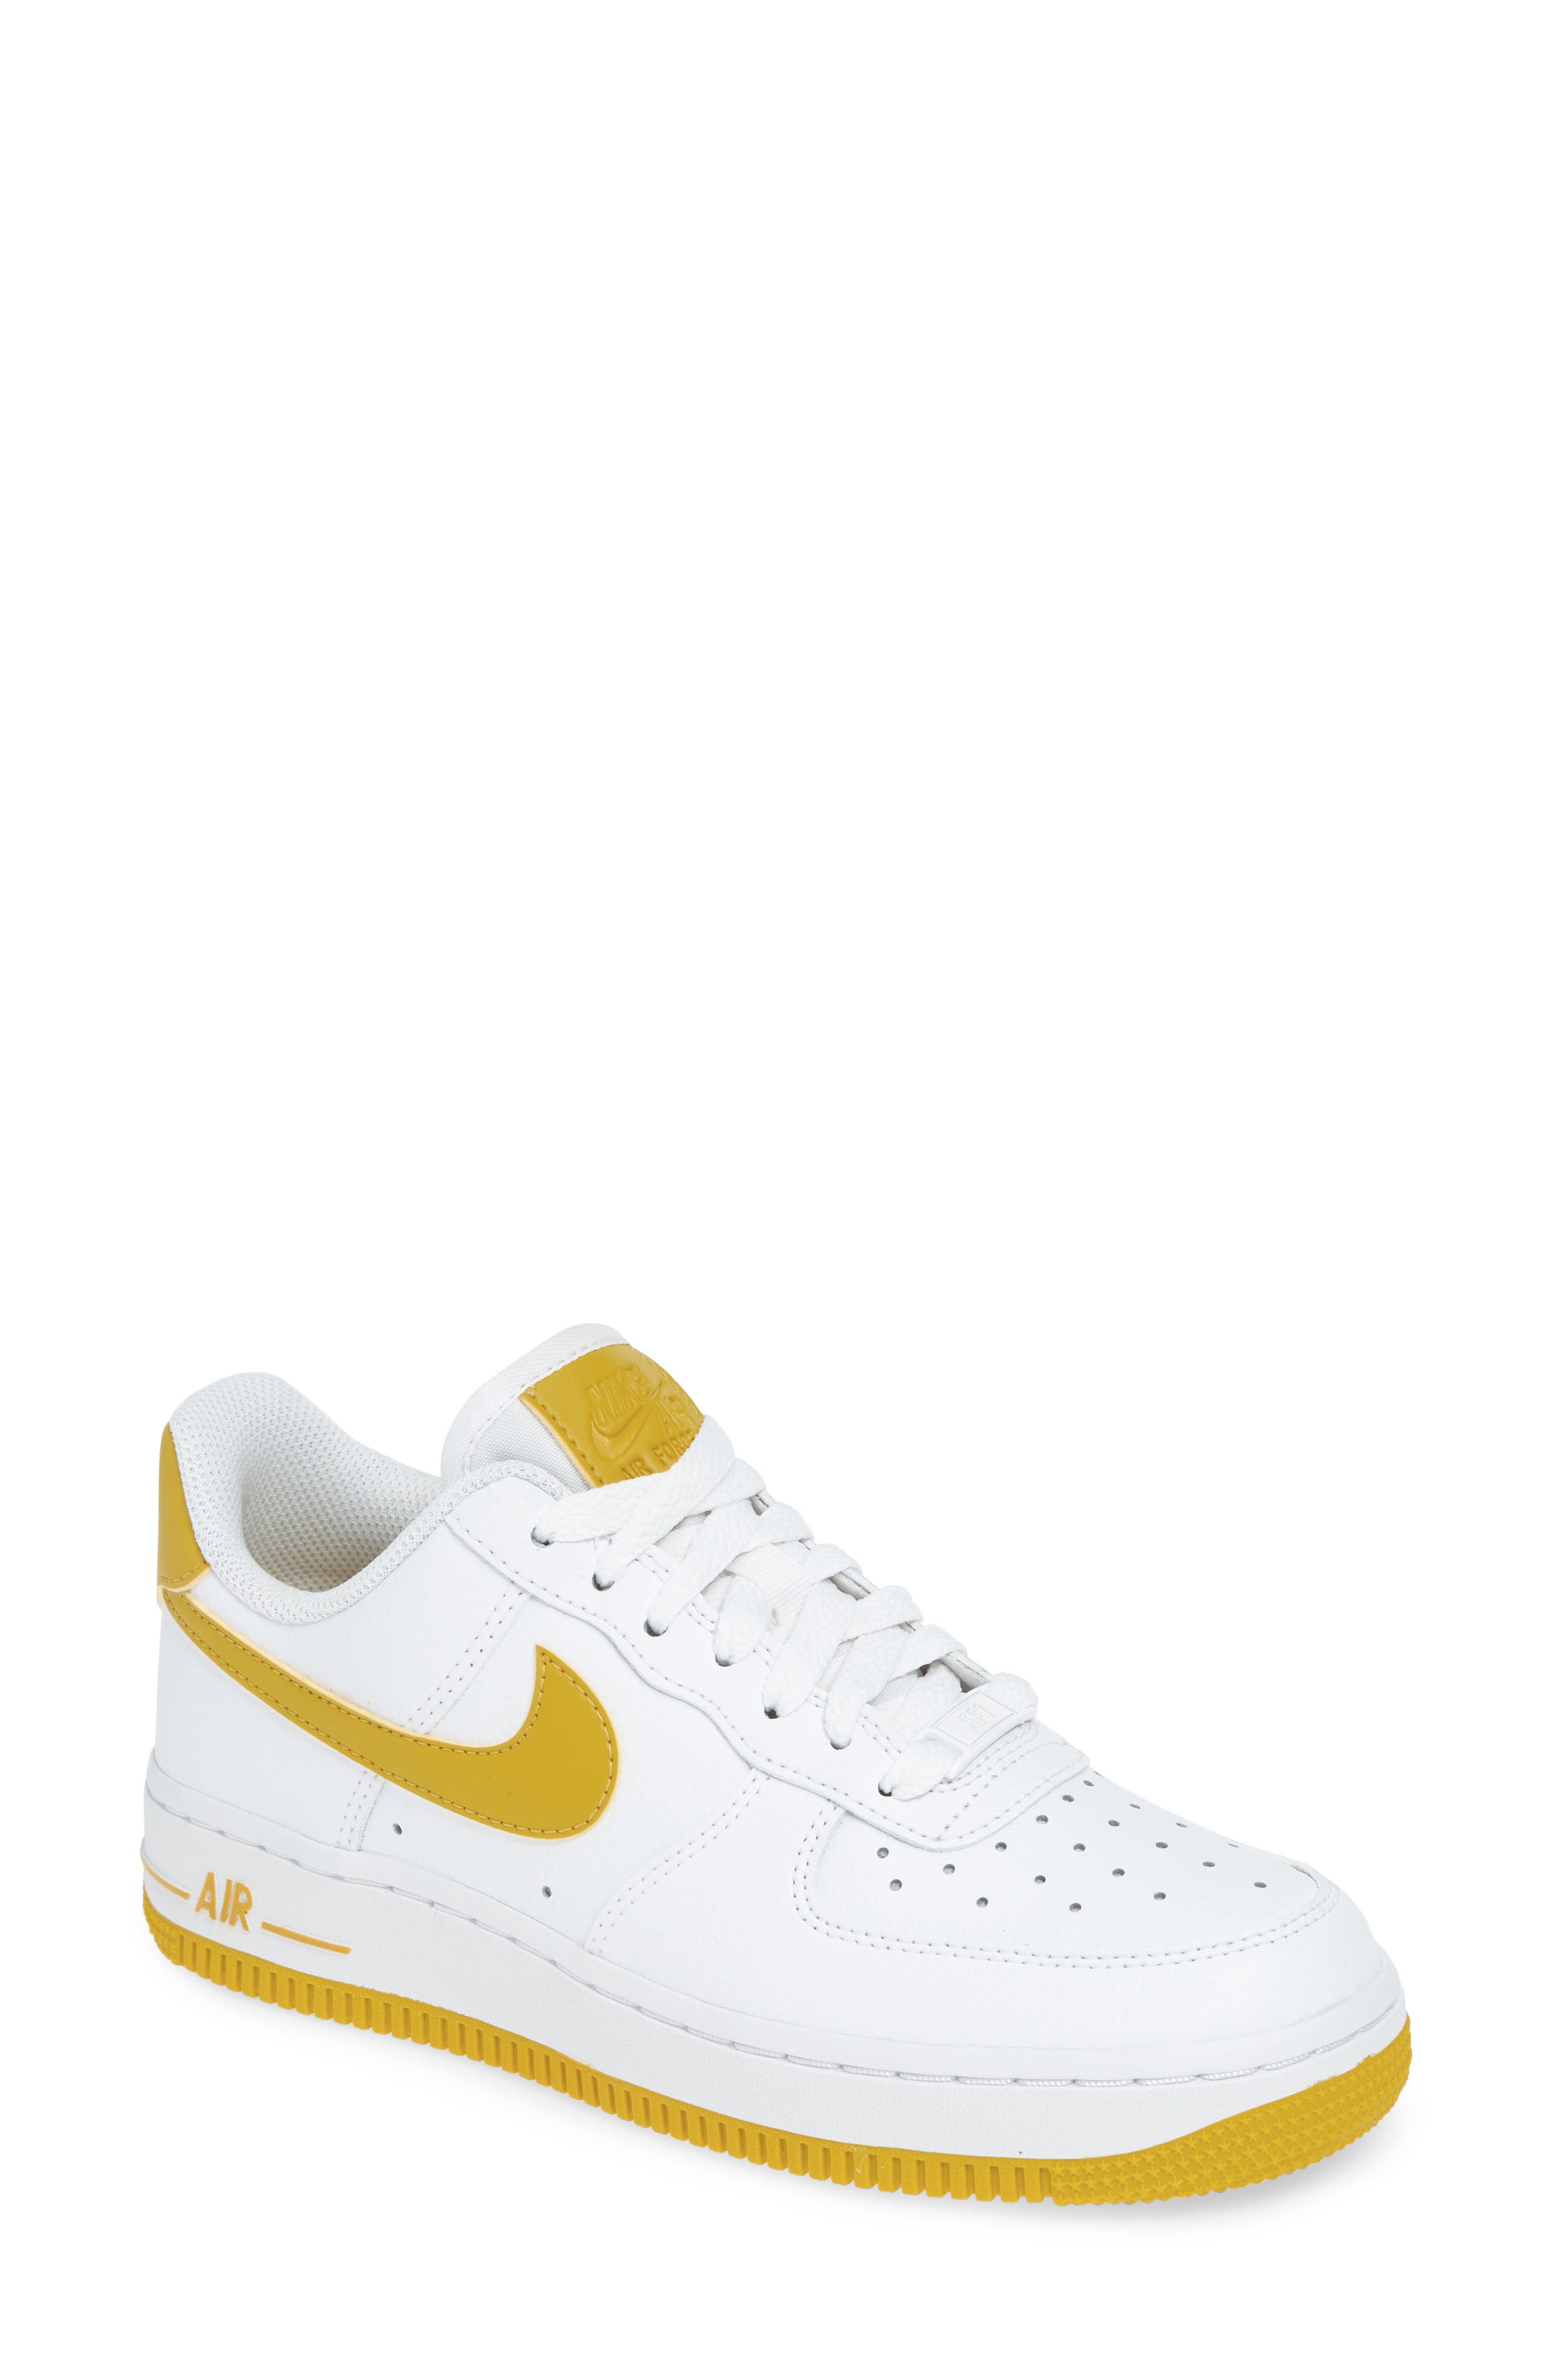 nordstrom air force 1 womens